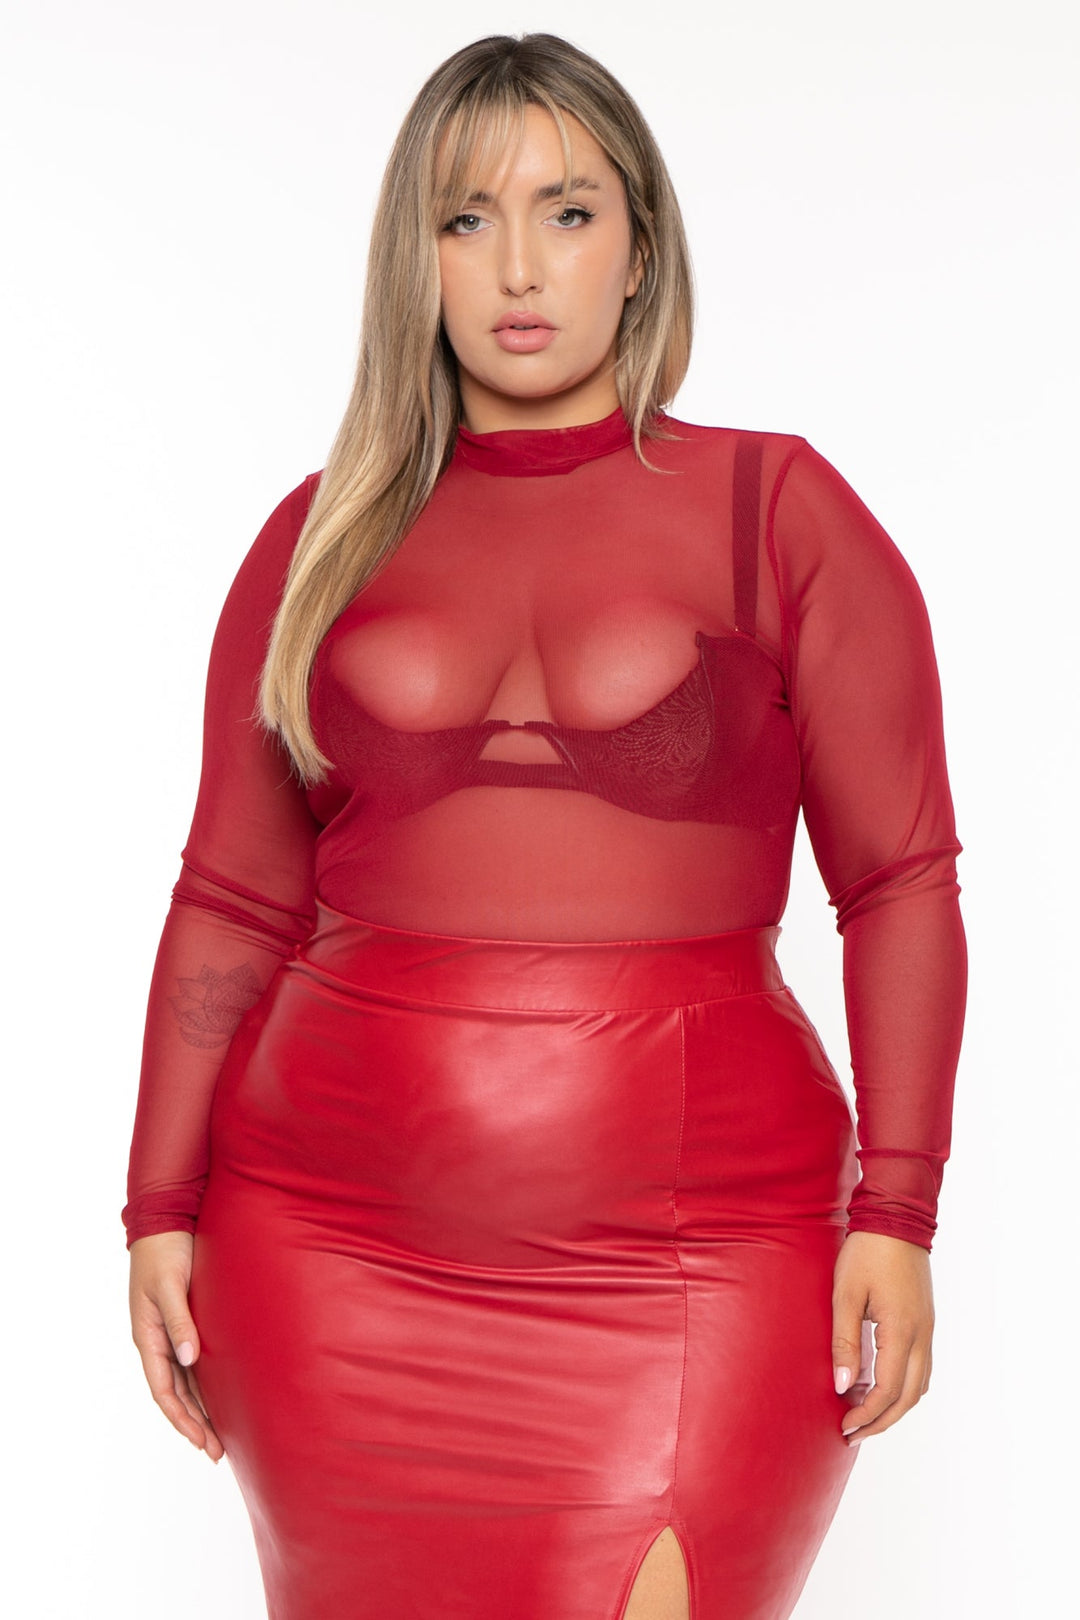 Affordable curvy Valentine's Day outfit. #curvyblogger #valentinesdayo